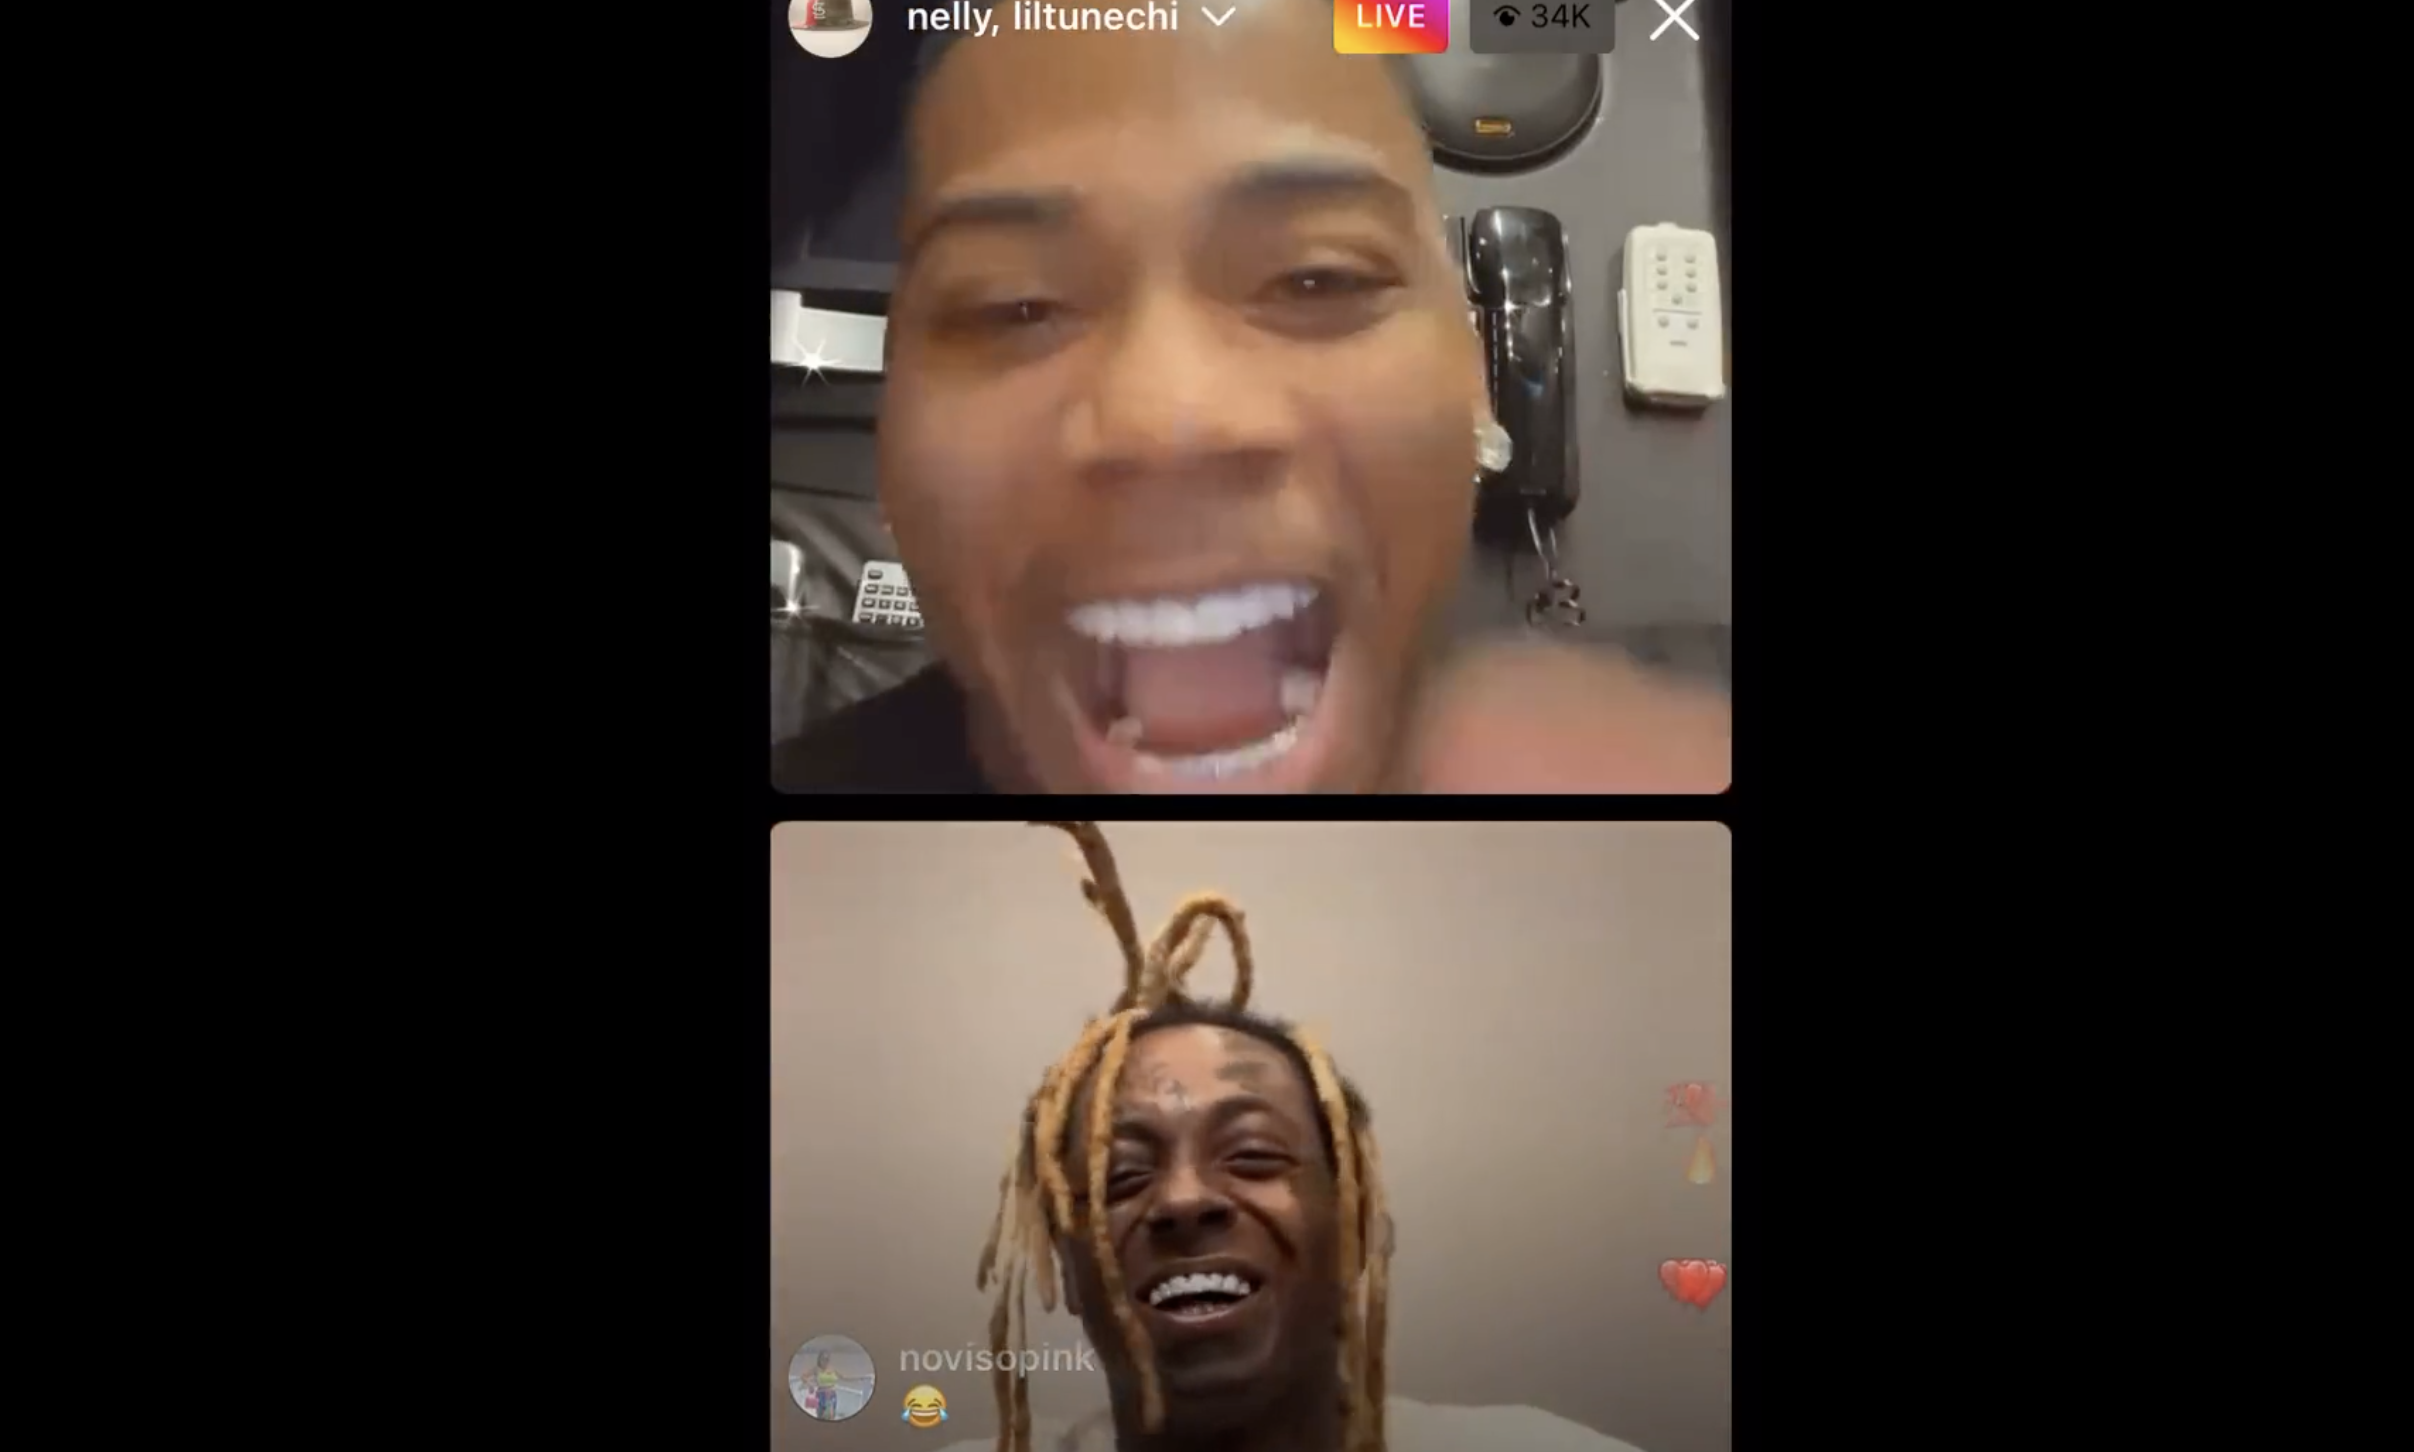 Lil Wayne & Nelly Try To Figure Out IG Live, Twitter Reacts